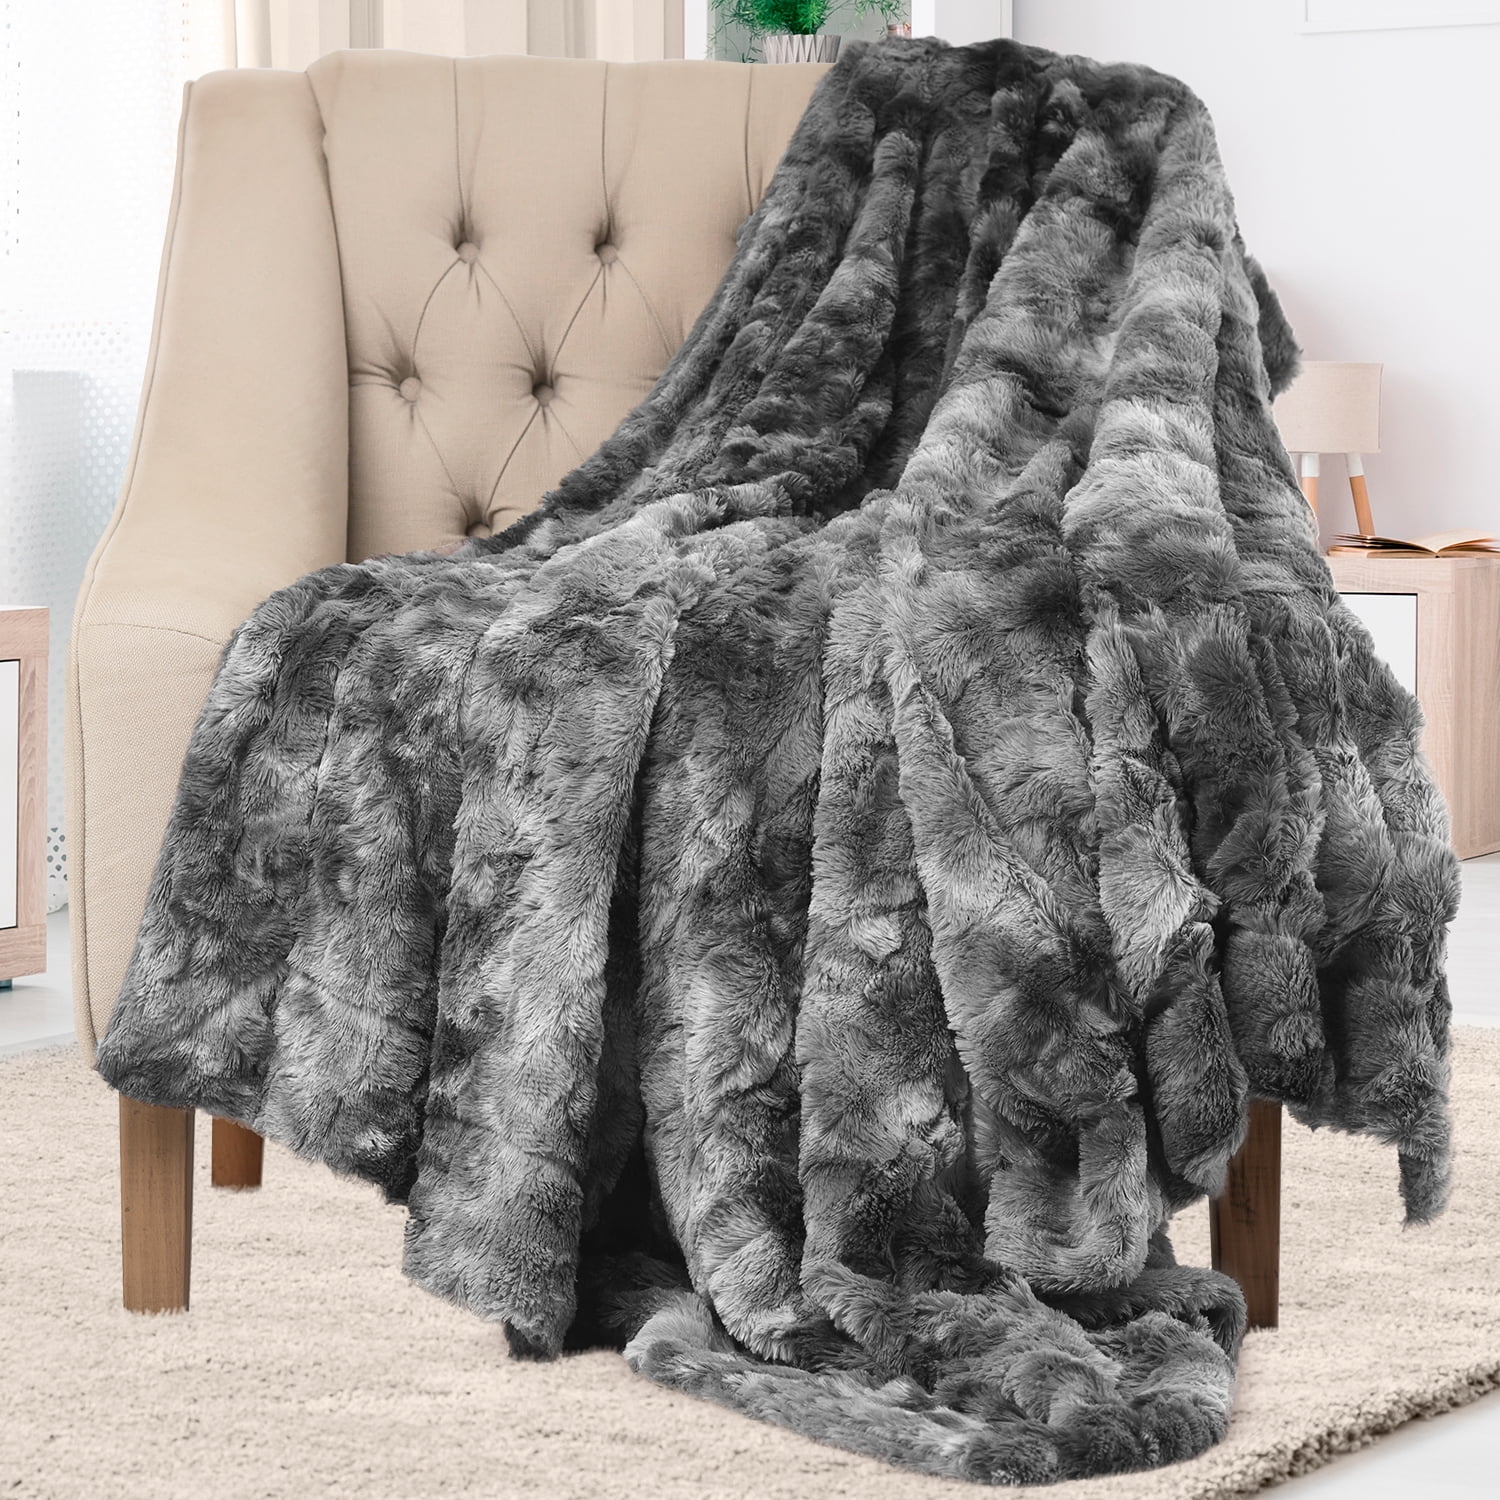 Embroidered Teddy Fleece  Mink Super Soft Throw Sofa Couch Throw Bed Blanket New 